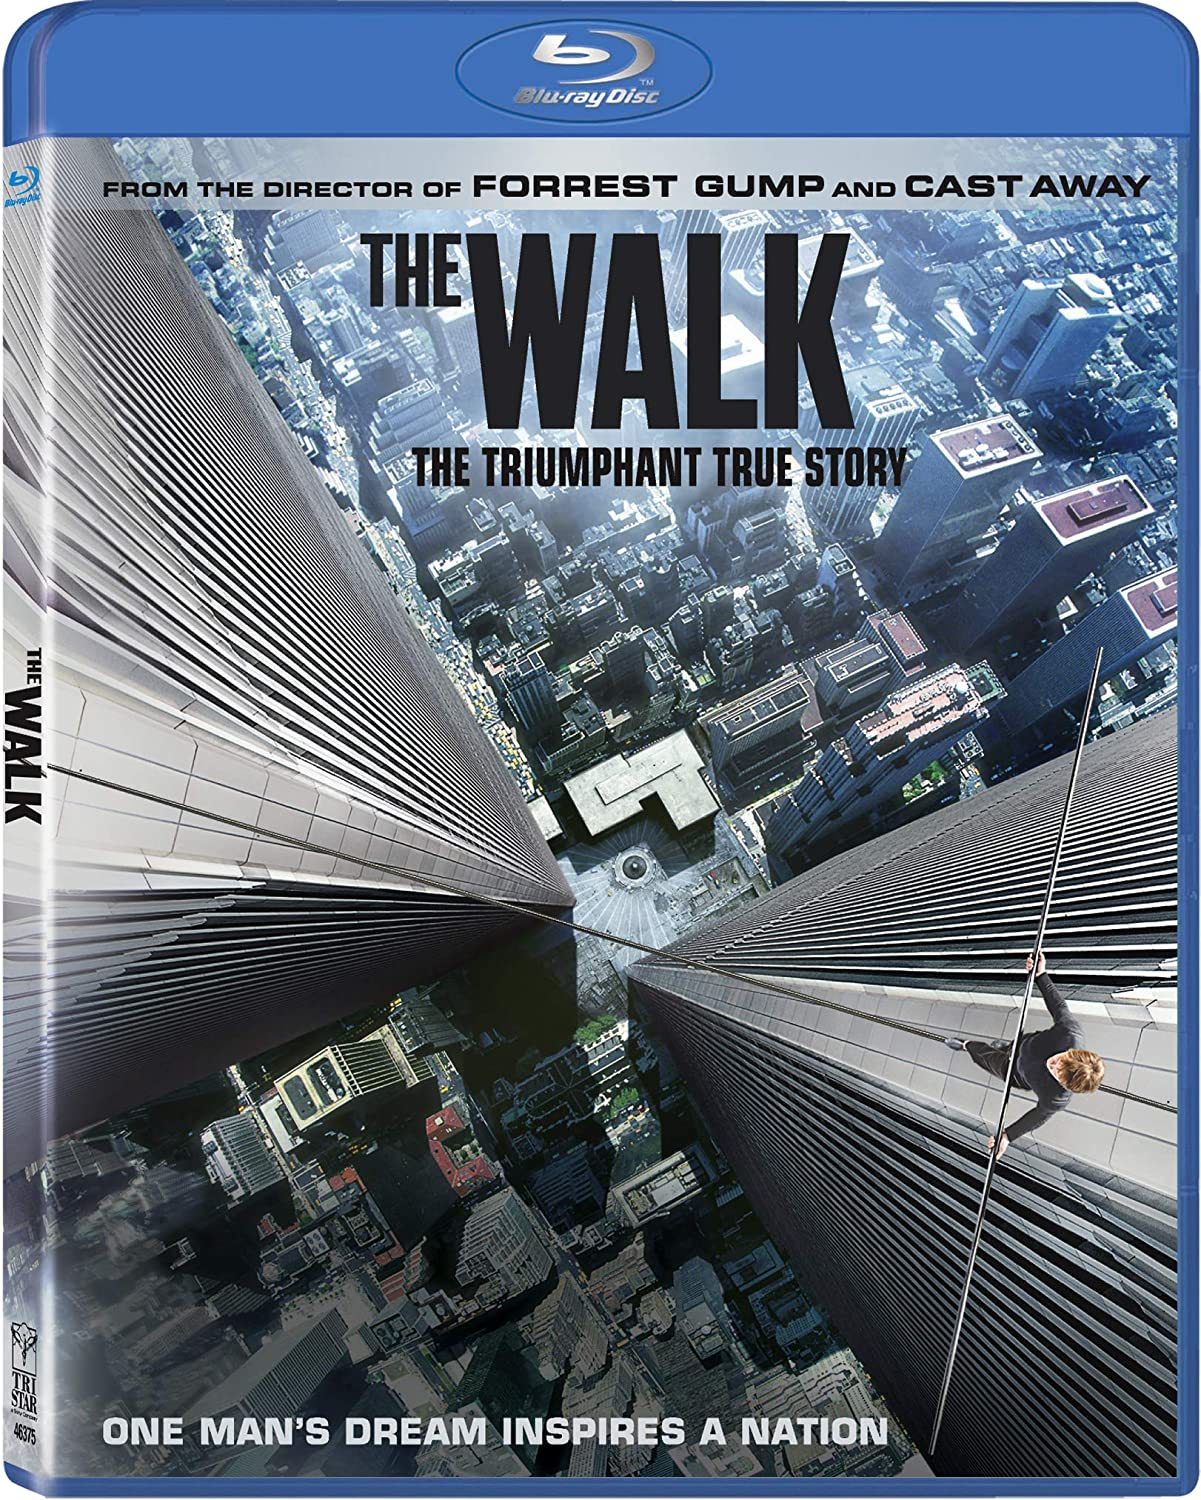 THE WALK Blu-Ray Movie-One Man's Dream Inspires a Nation- Brand New